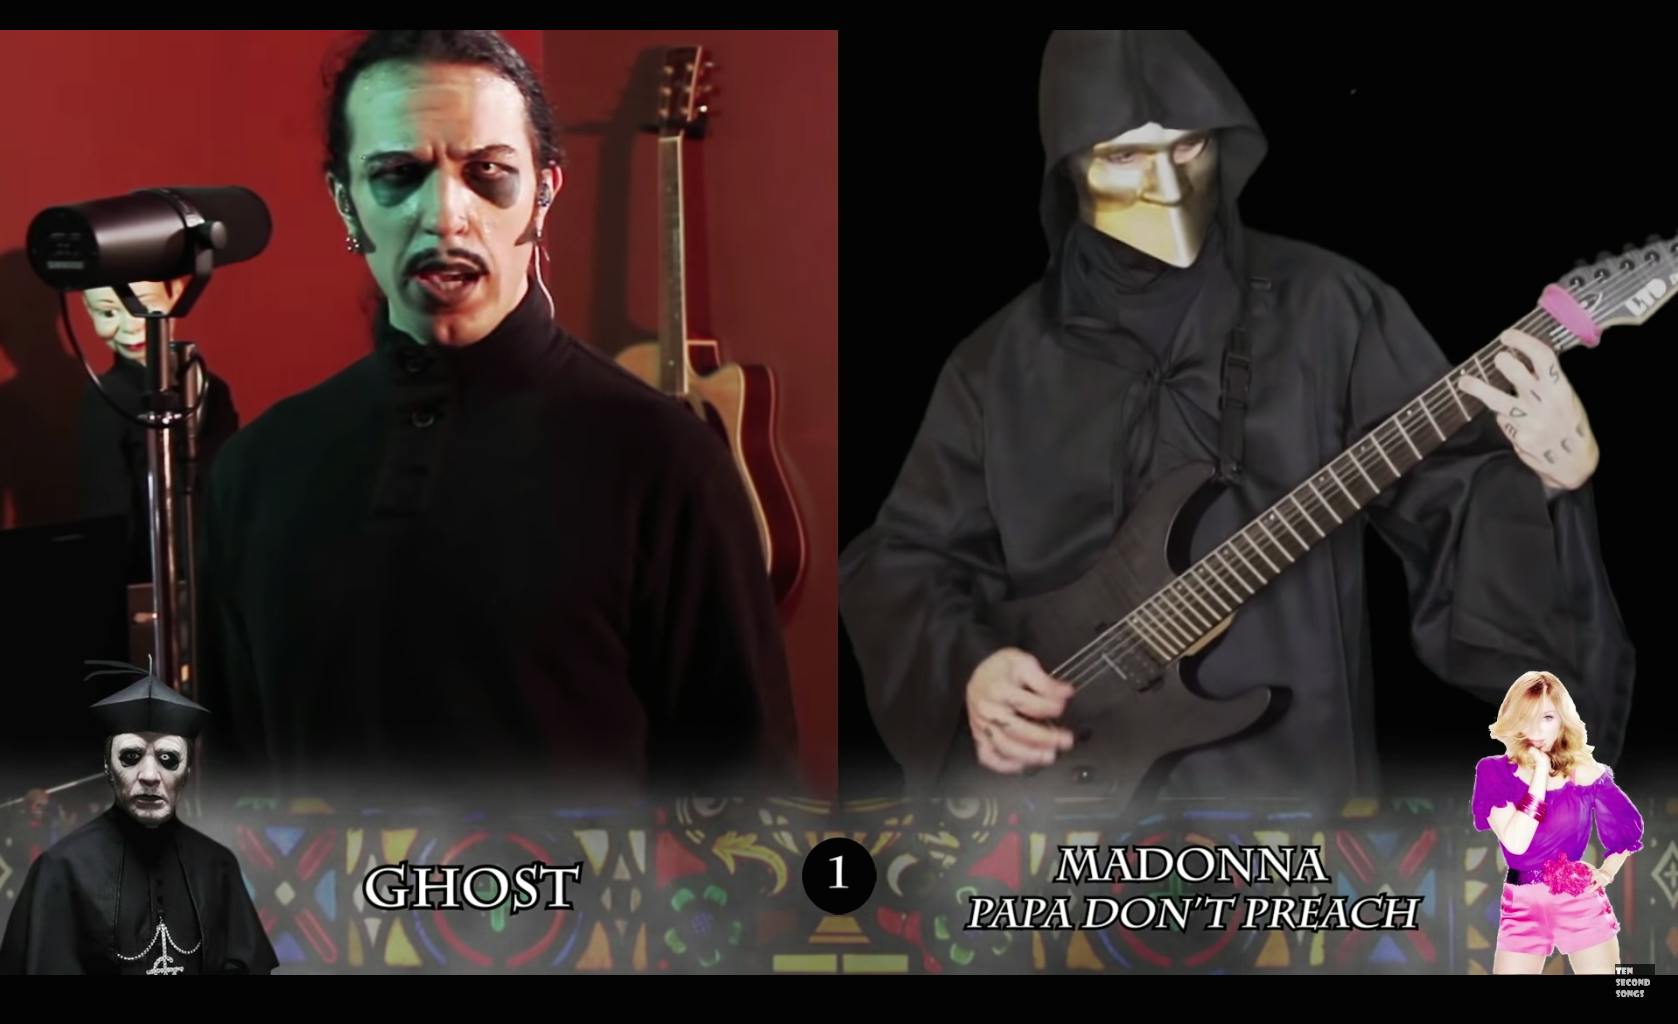 Hear 10 Songs Sung In The Style of Ghost